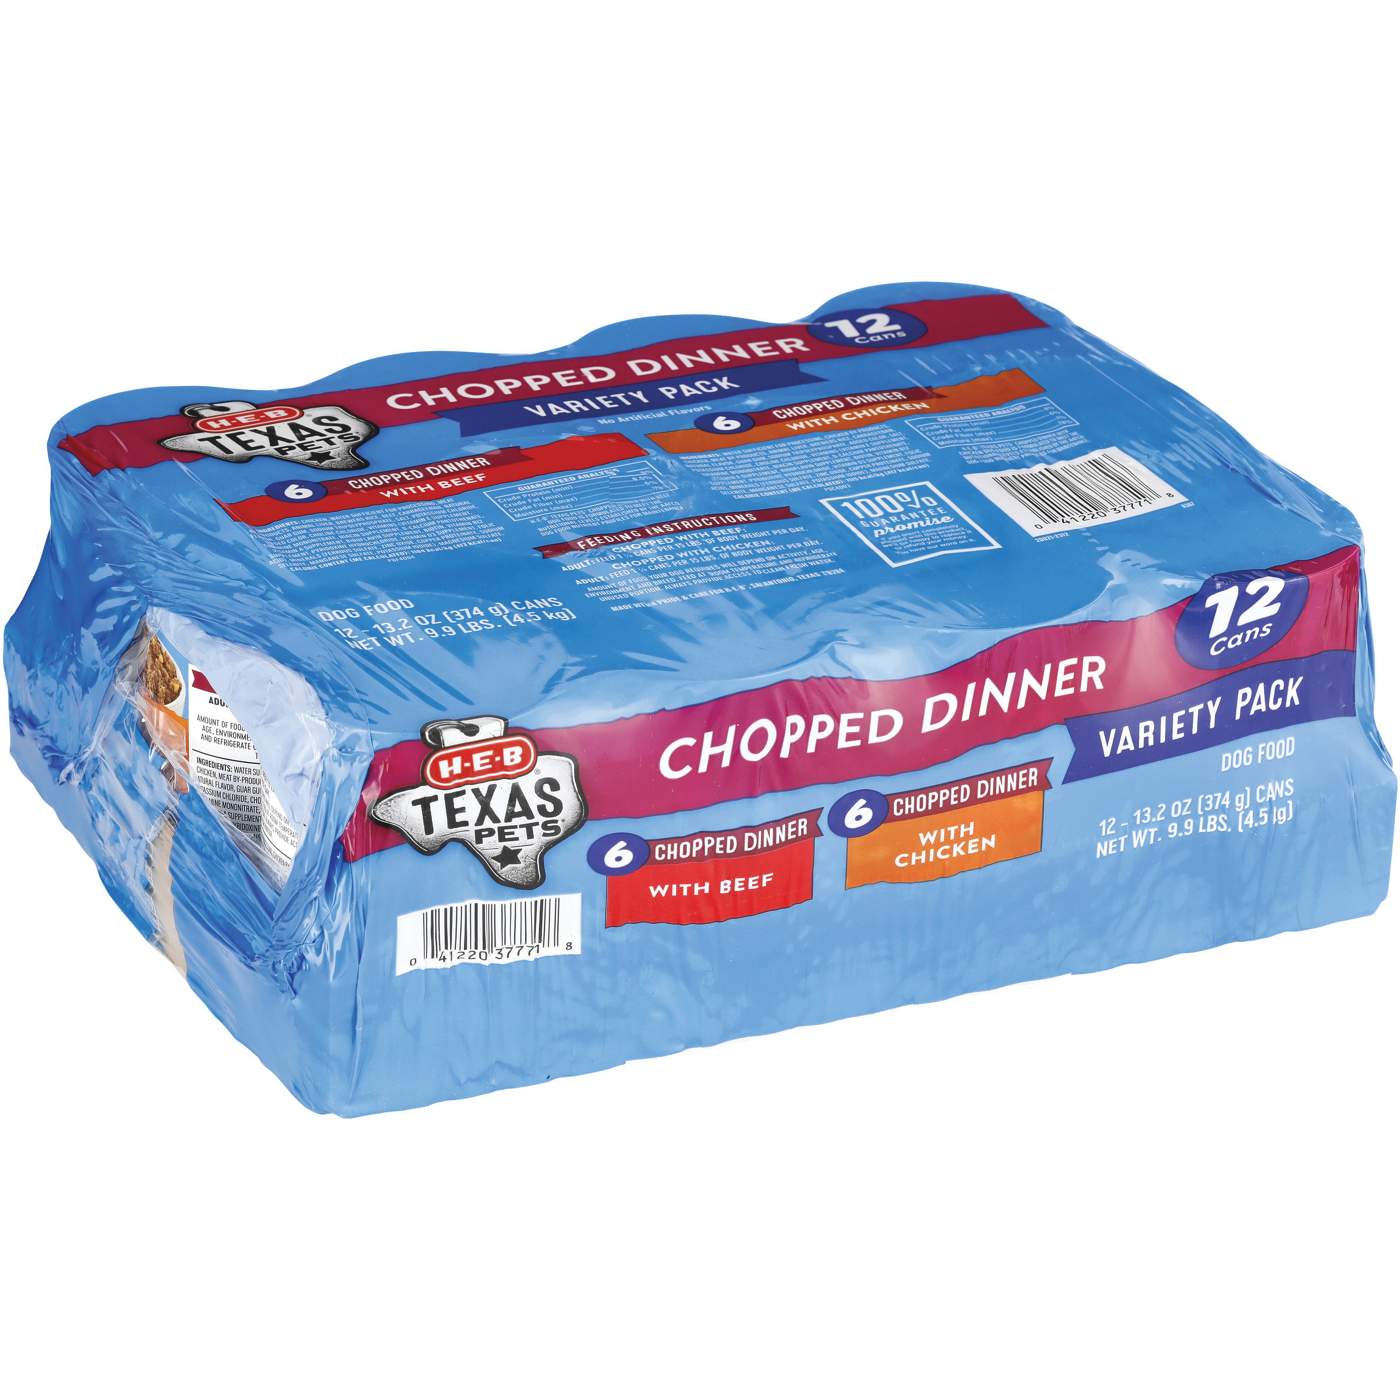 H-E-B Texas Pets Chopped Dinner Wet Dog Food Variety Pack - Chicken & Beef; image 2 of 2